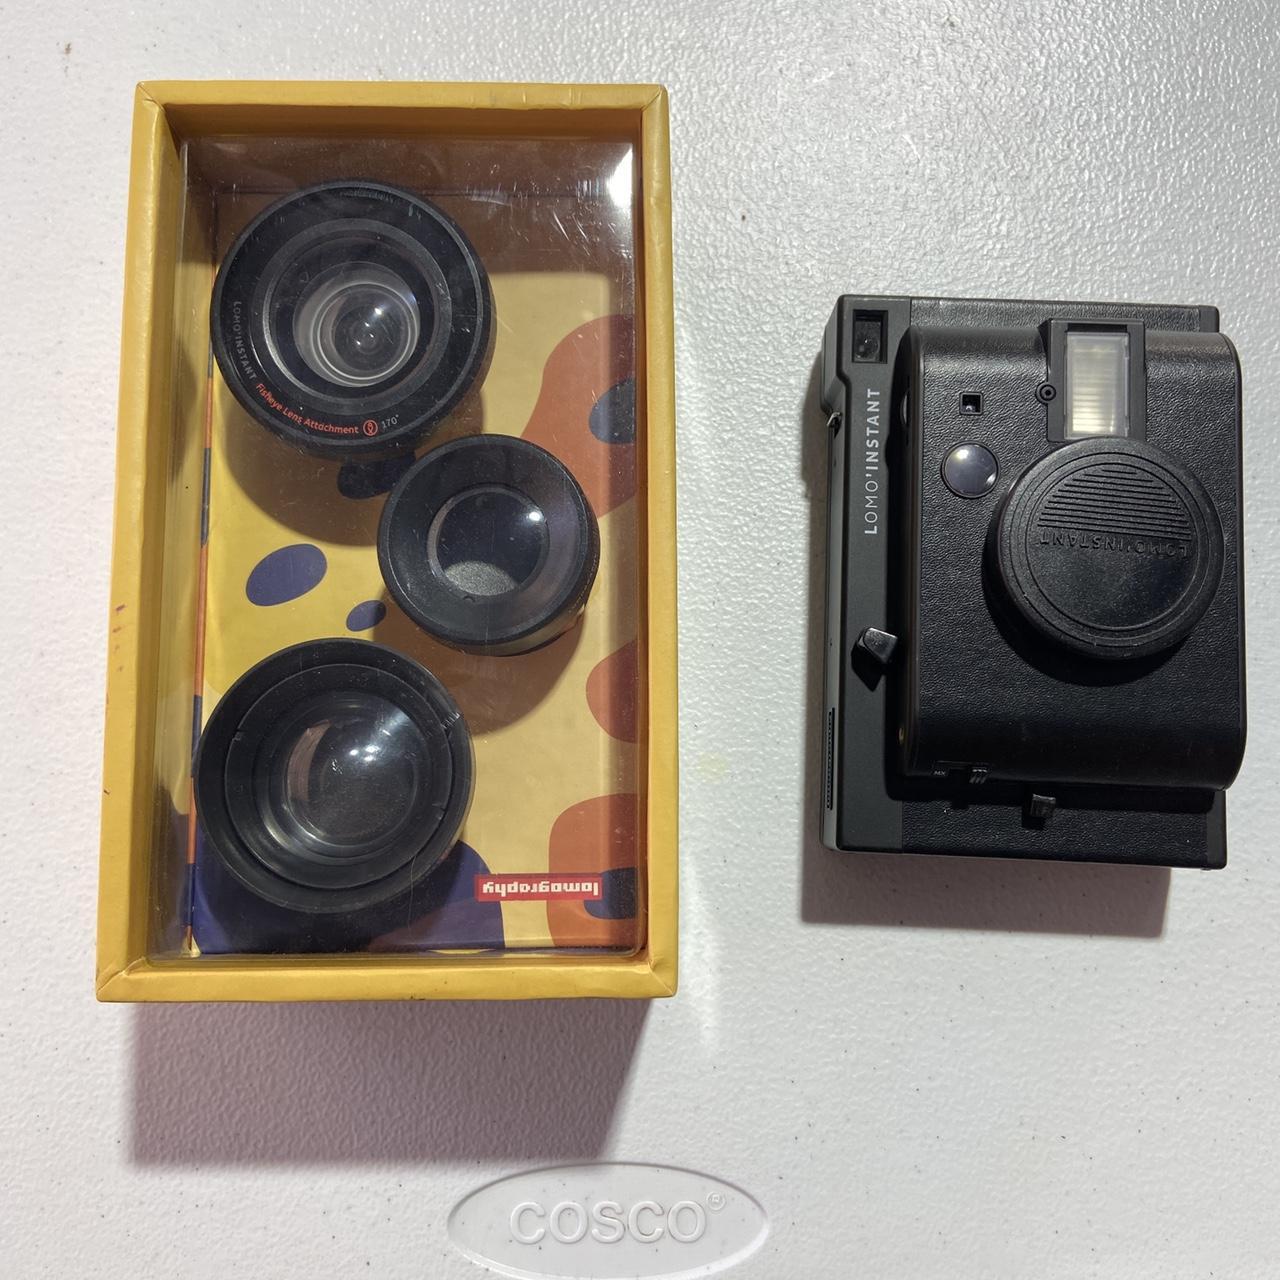 Product Image 1 - Lomo instant mini with lens